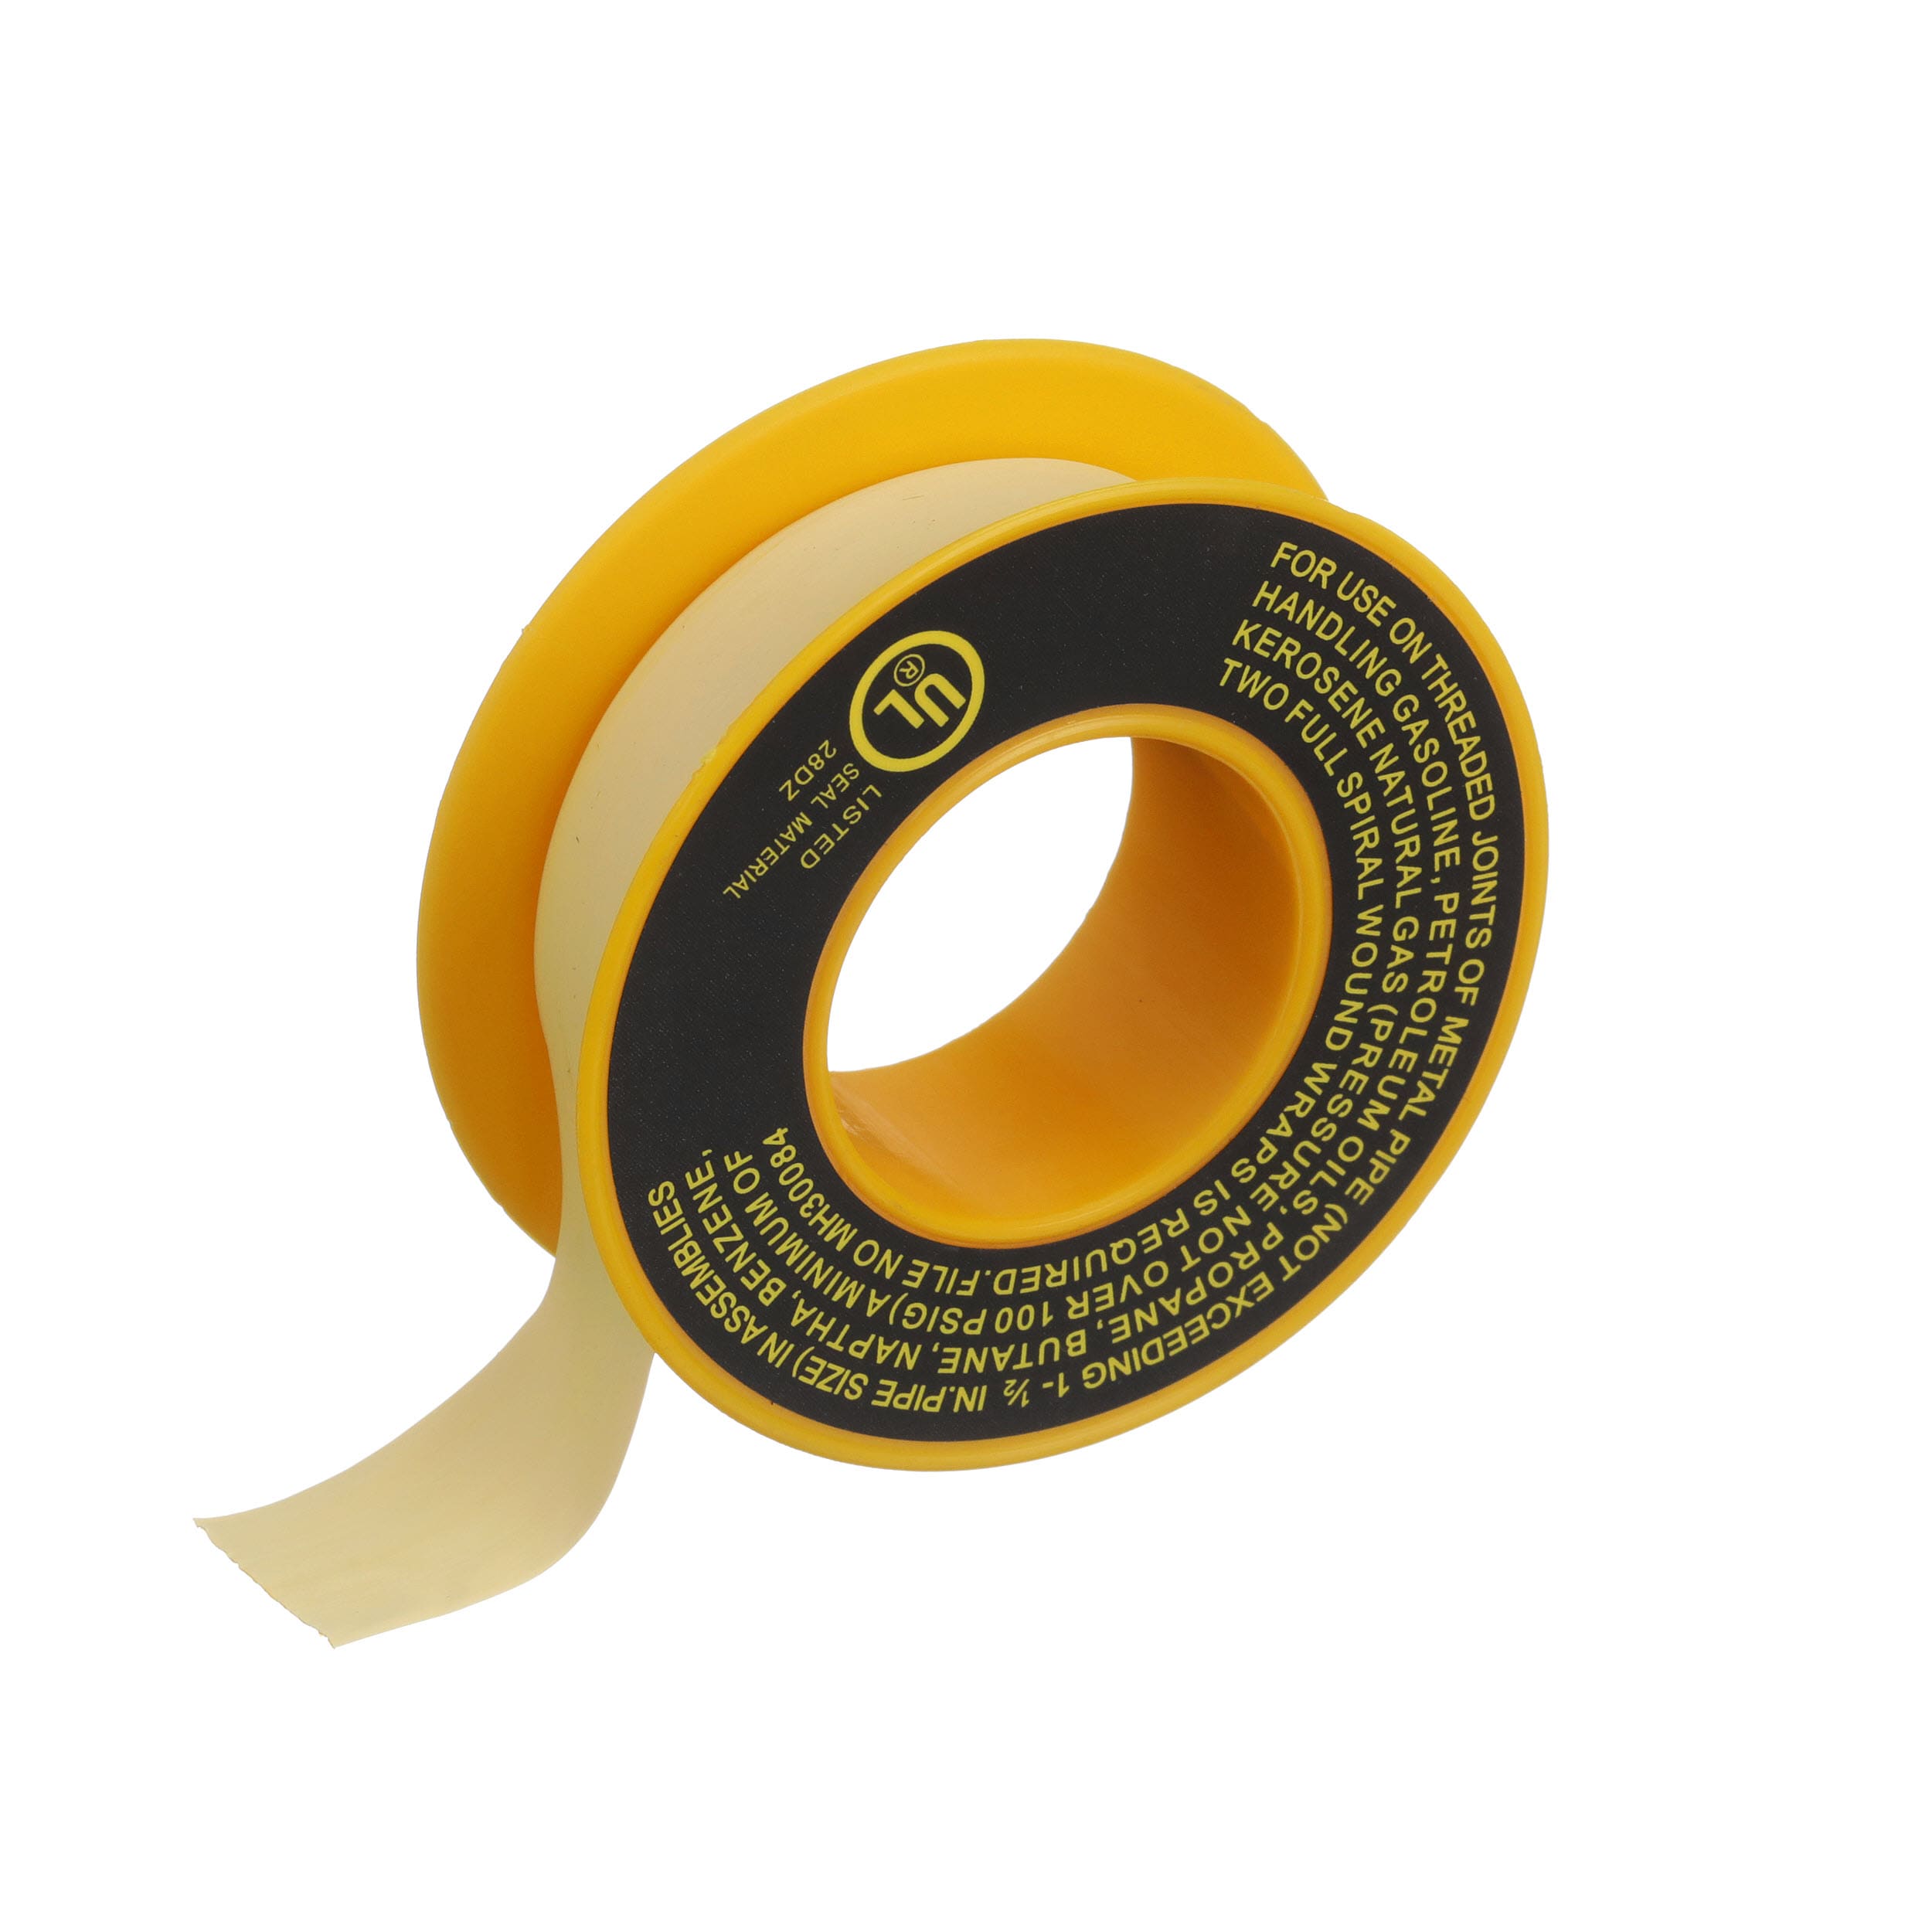 EPS PLUMBING 4 GAS APPROVED PTFE TAPE 12MM X 5M 11-01151 